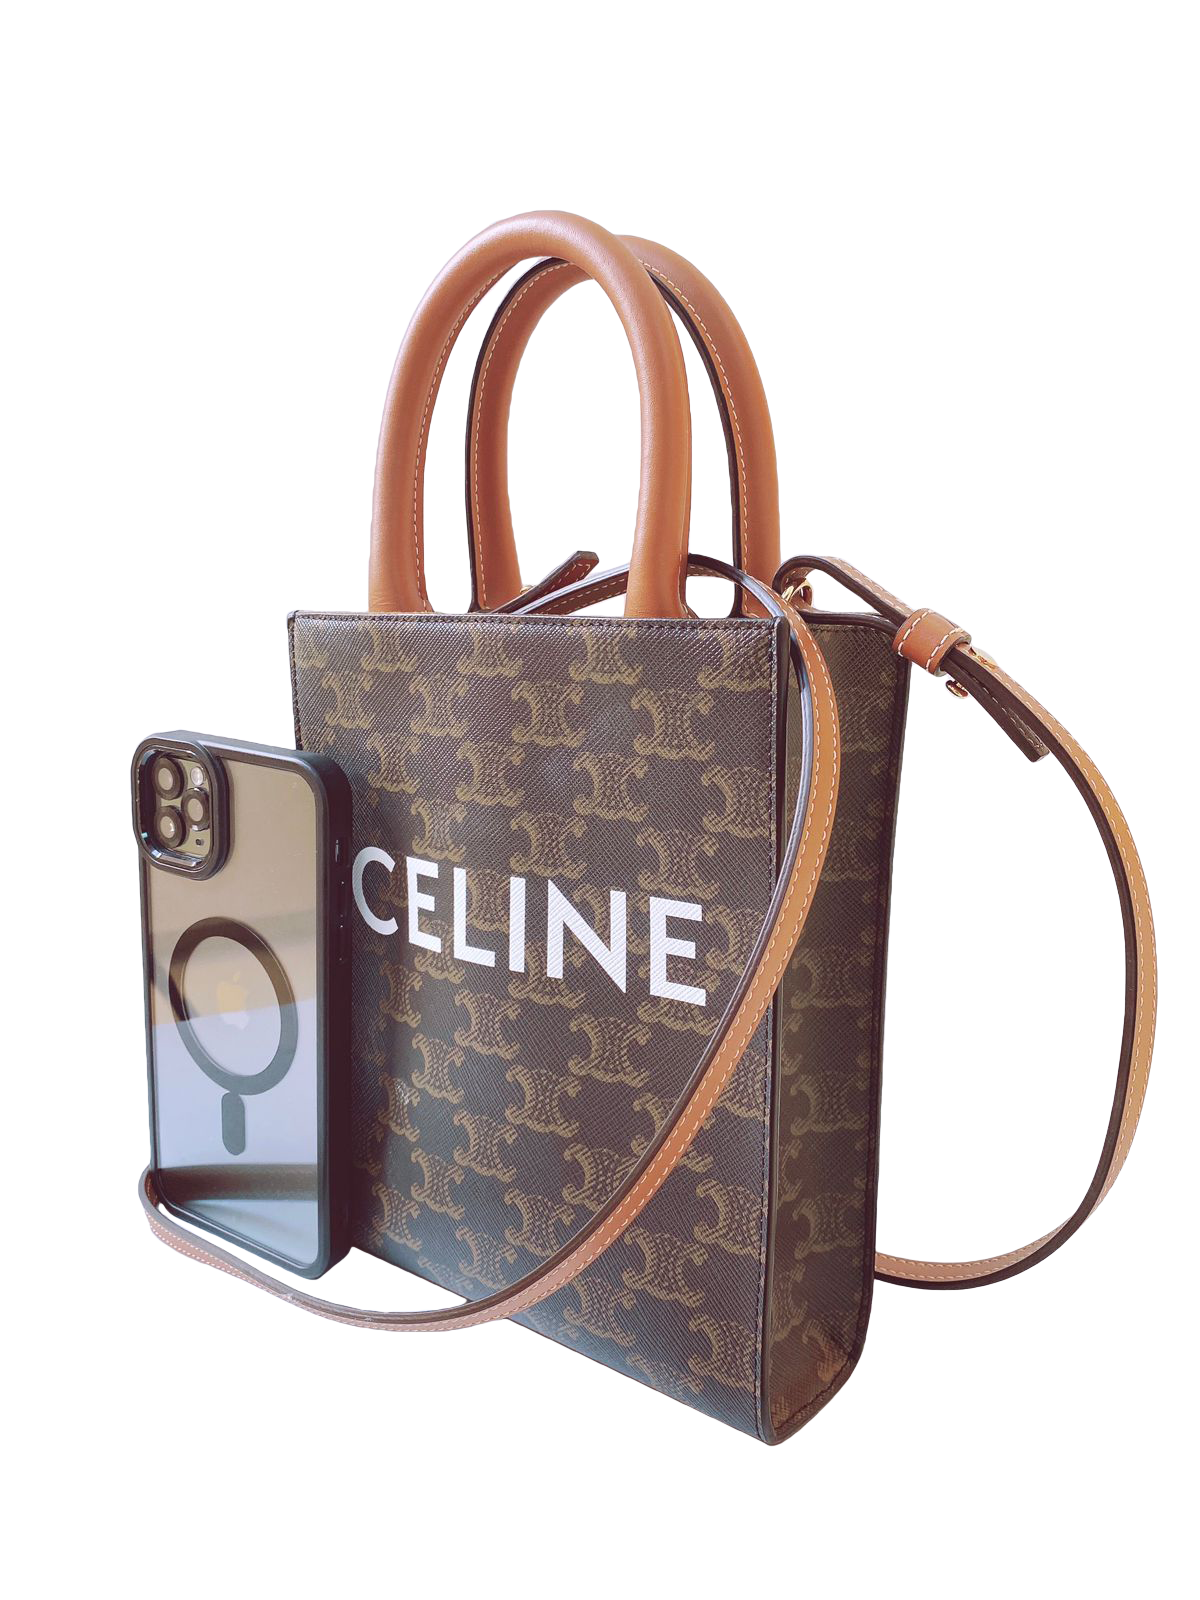 TAN TRIOMPHE CANVAS AND CALFSKIN LEATHER MINI CABAS VERTICAL BAG -  styleforless